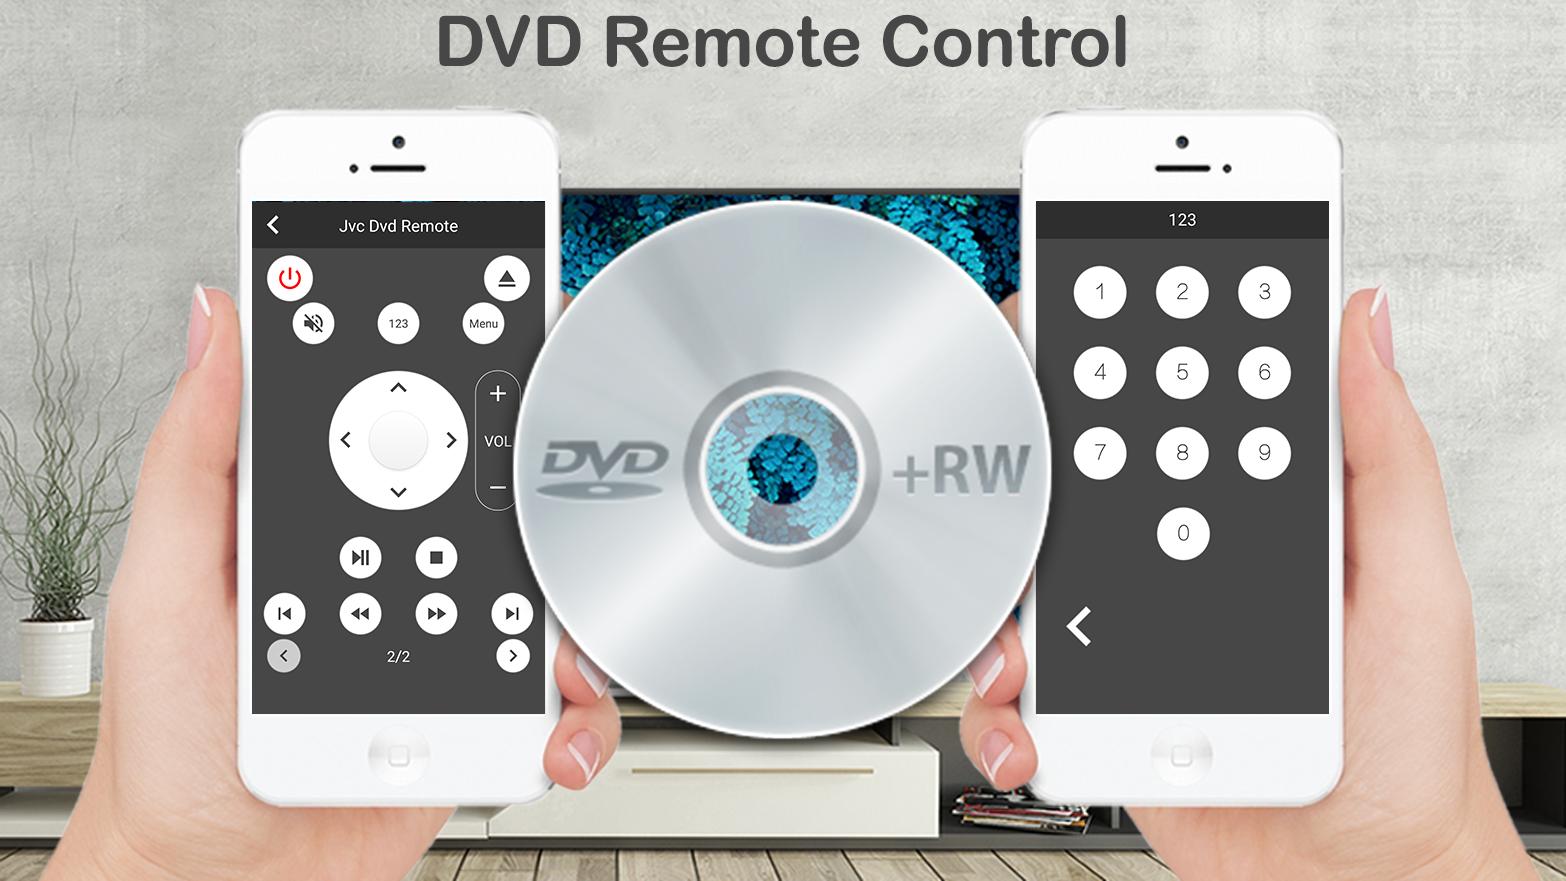 Dvd remote control for all dvd for Android - APK Download